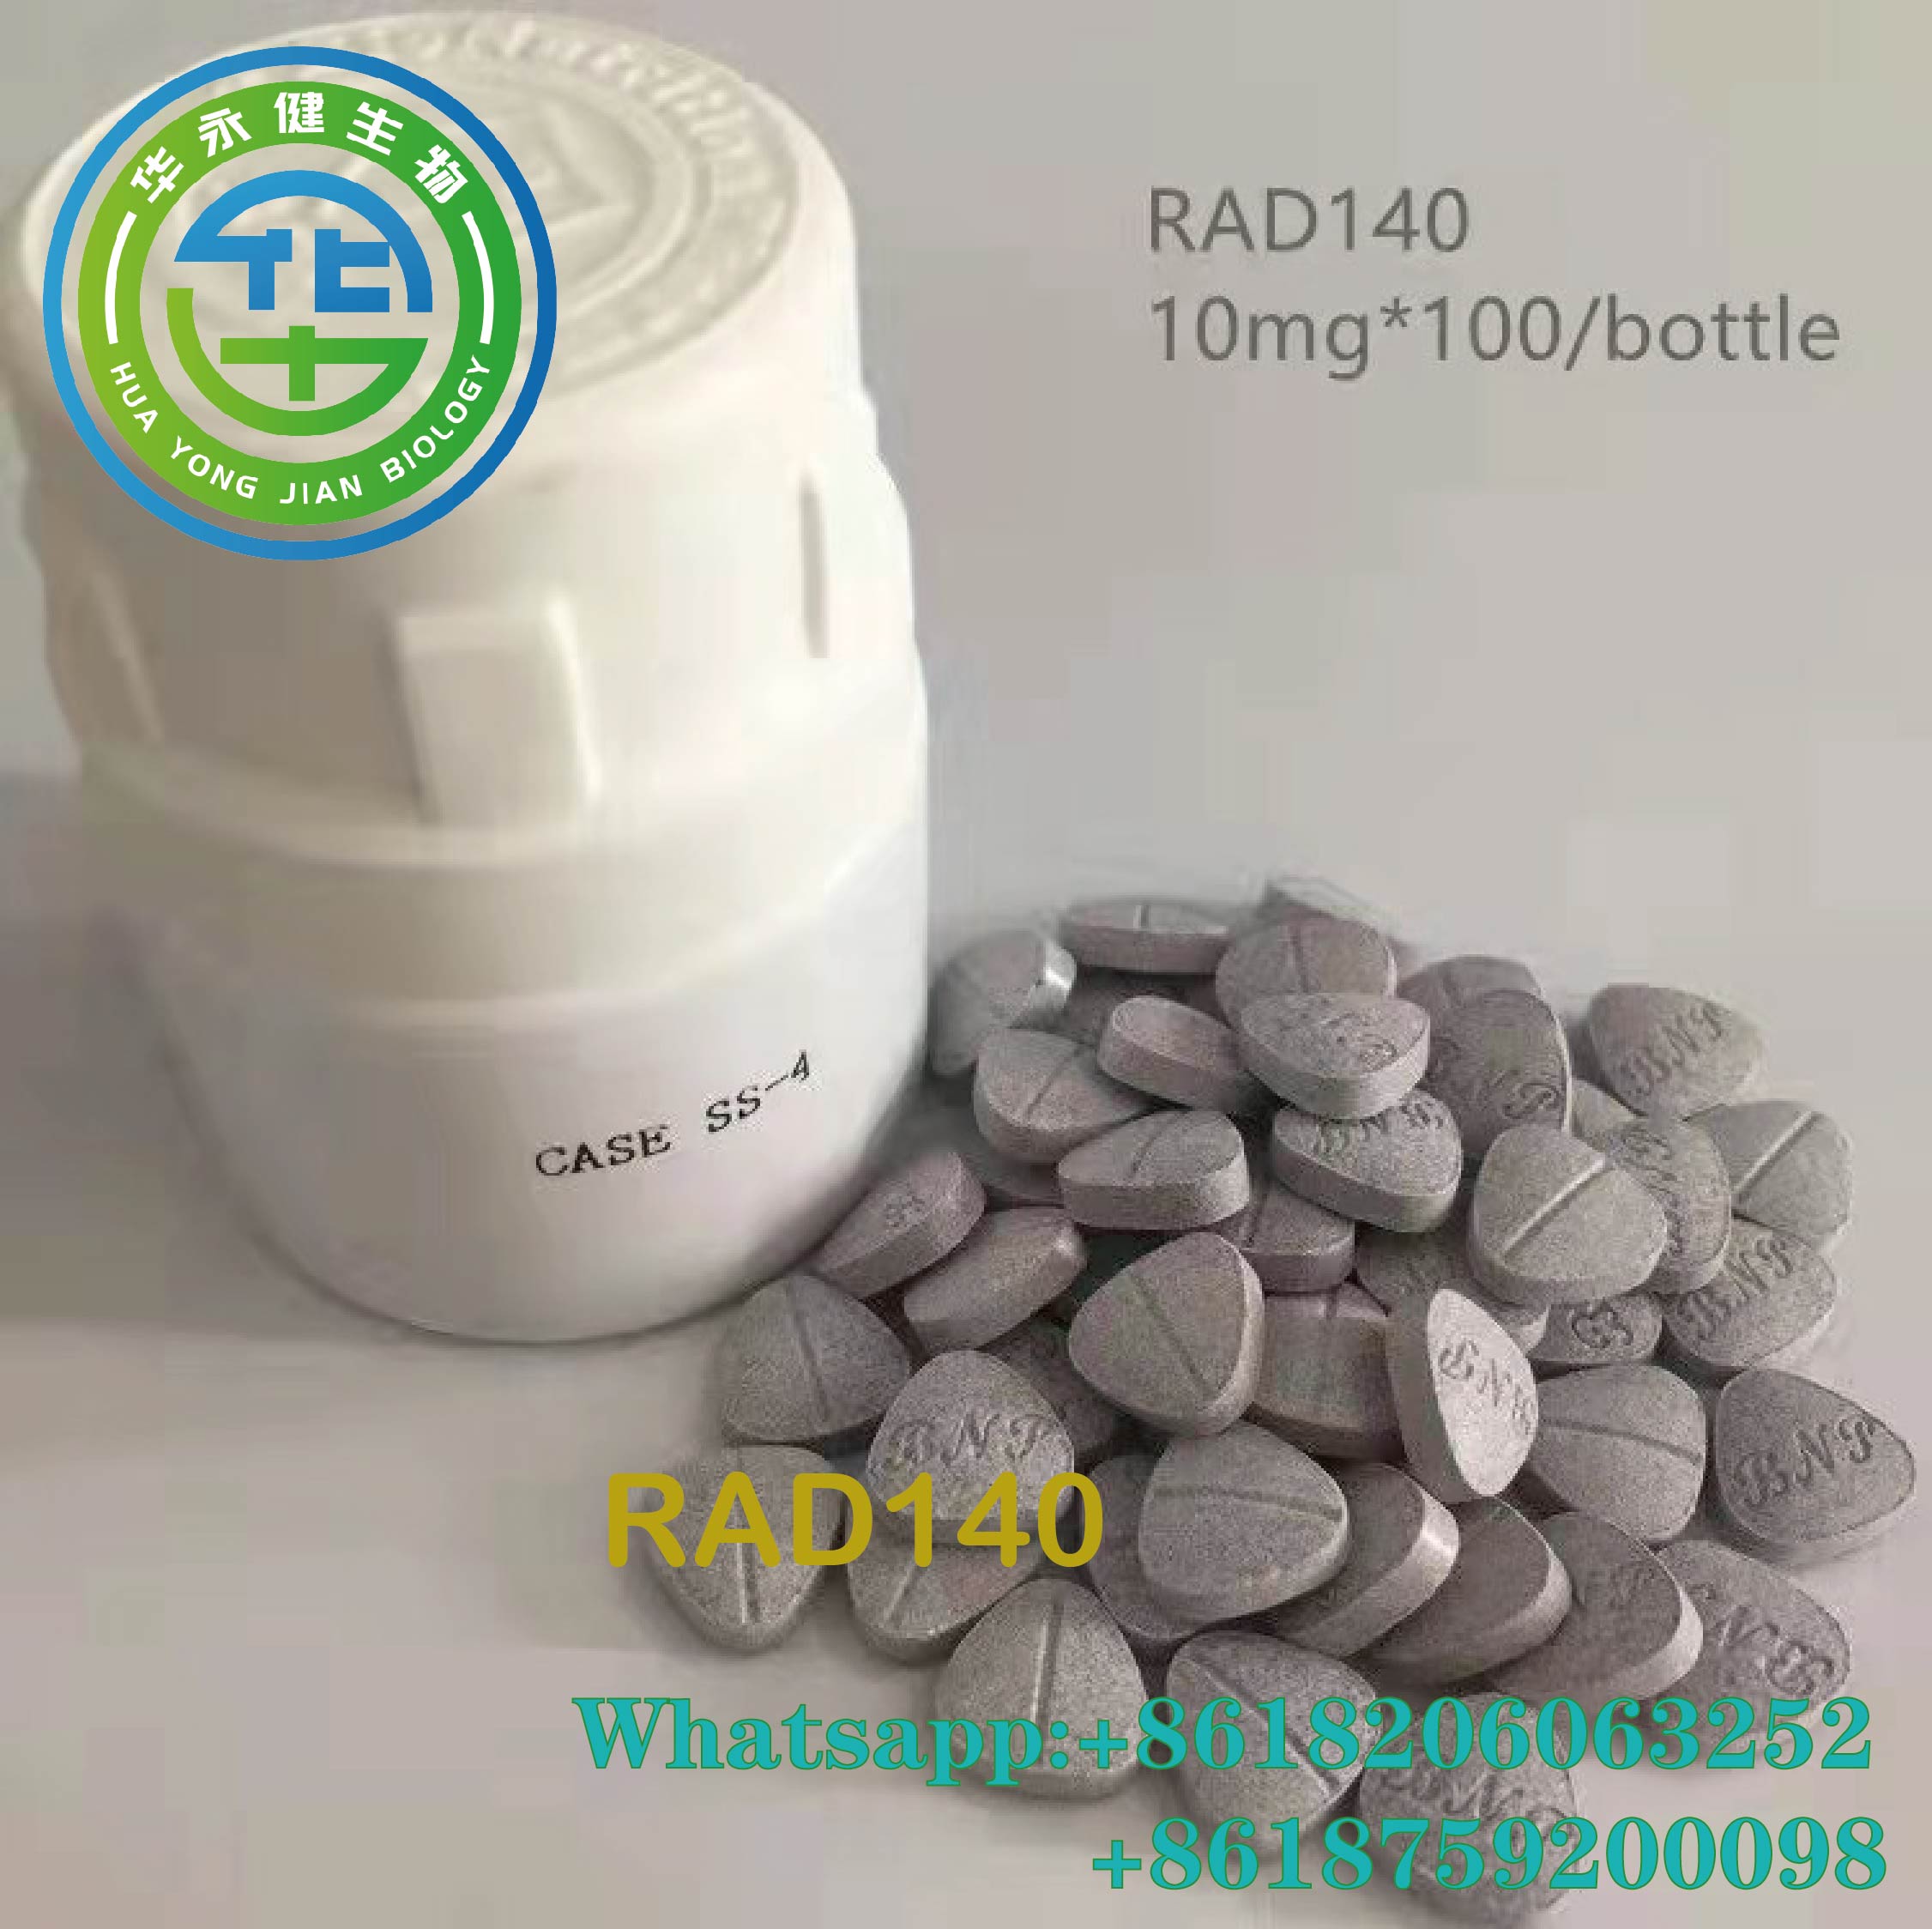 Oral Anabolic Testolone 10mg*100/bottle Tablets Steroids Sarms Raw Powder RAD140 pills Featured Image